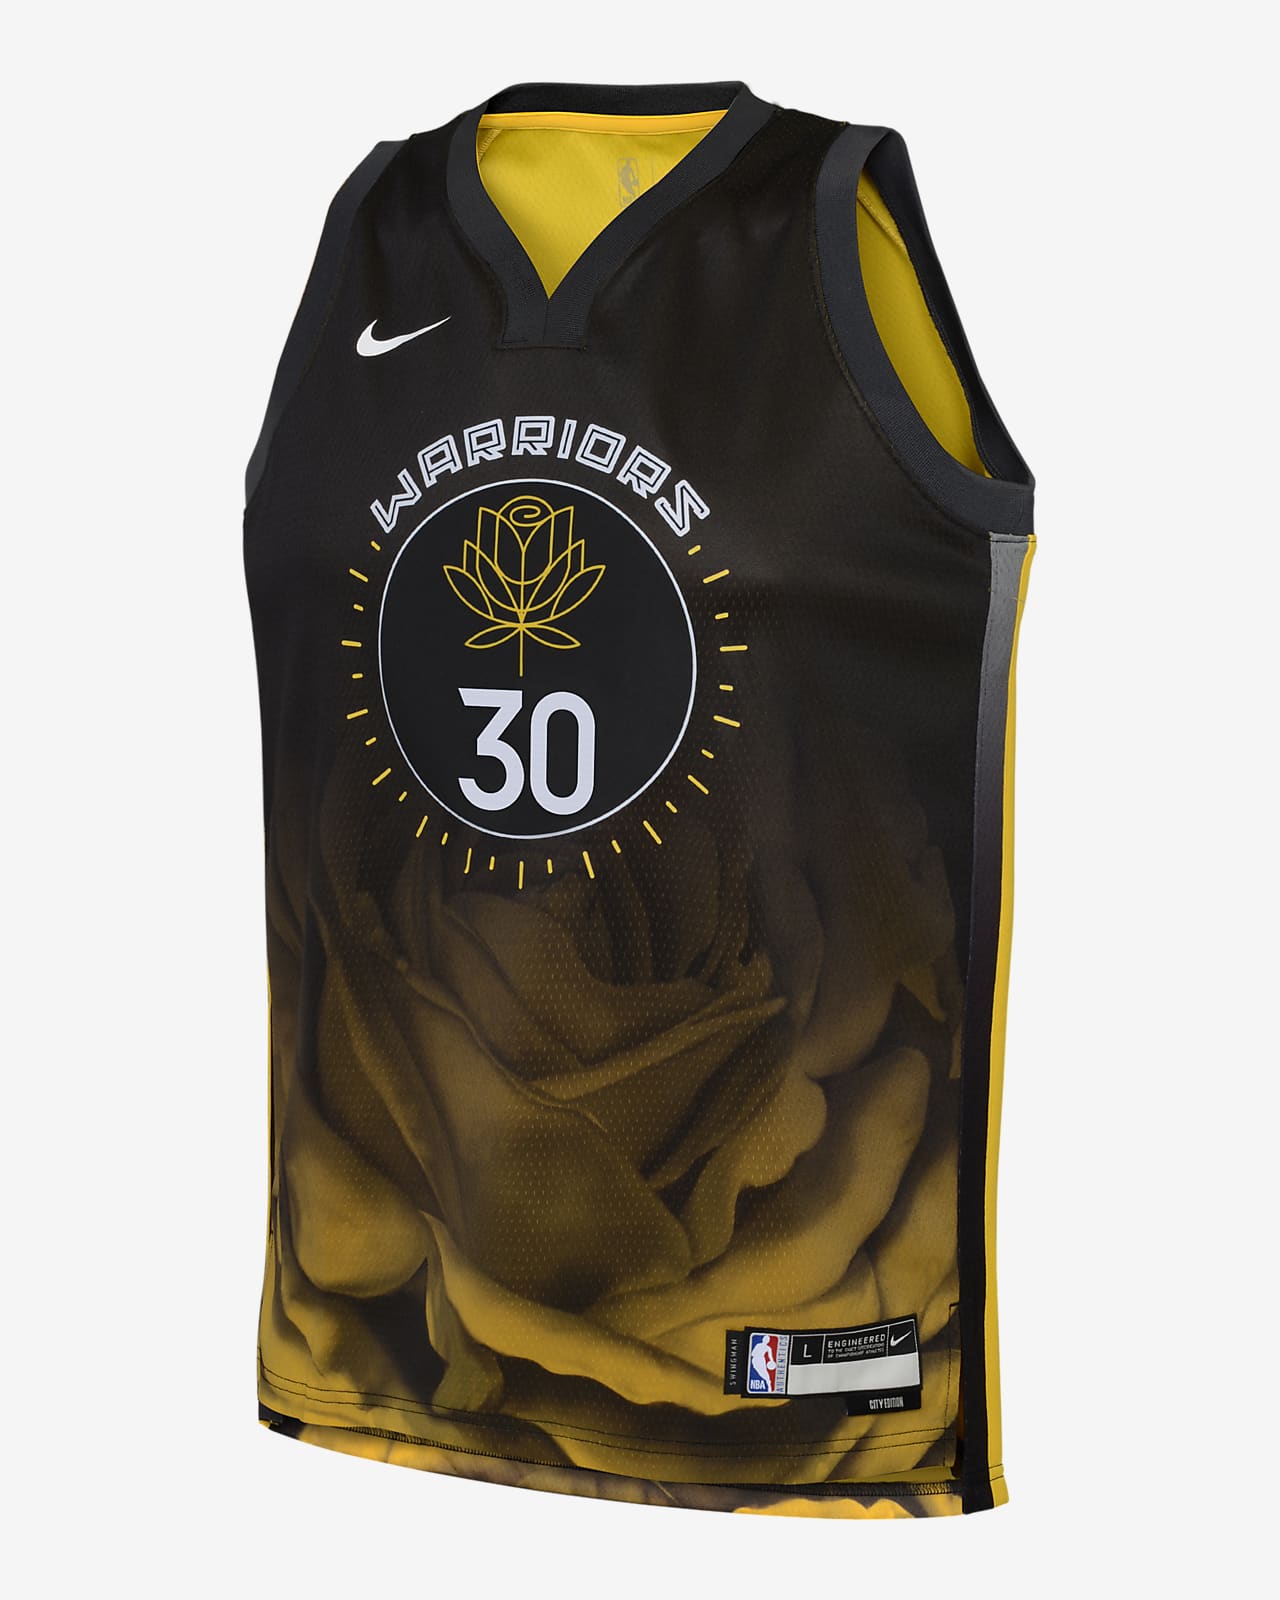 cheap curry jersey